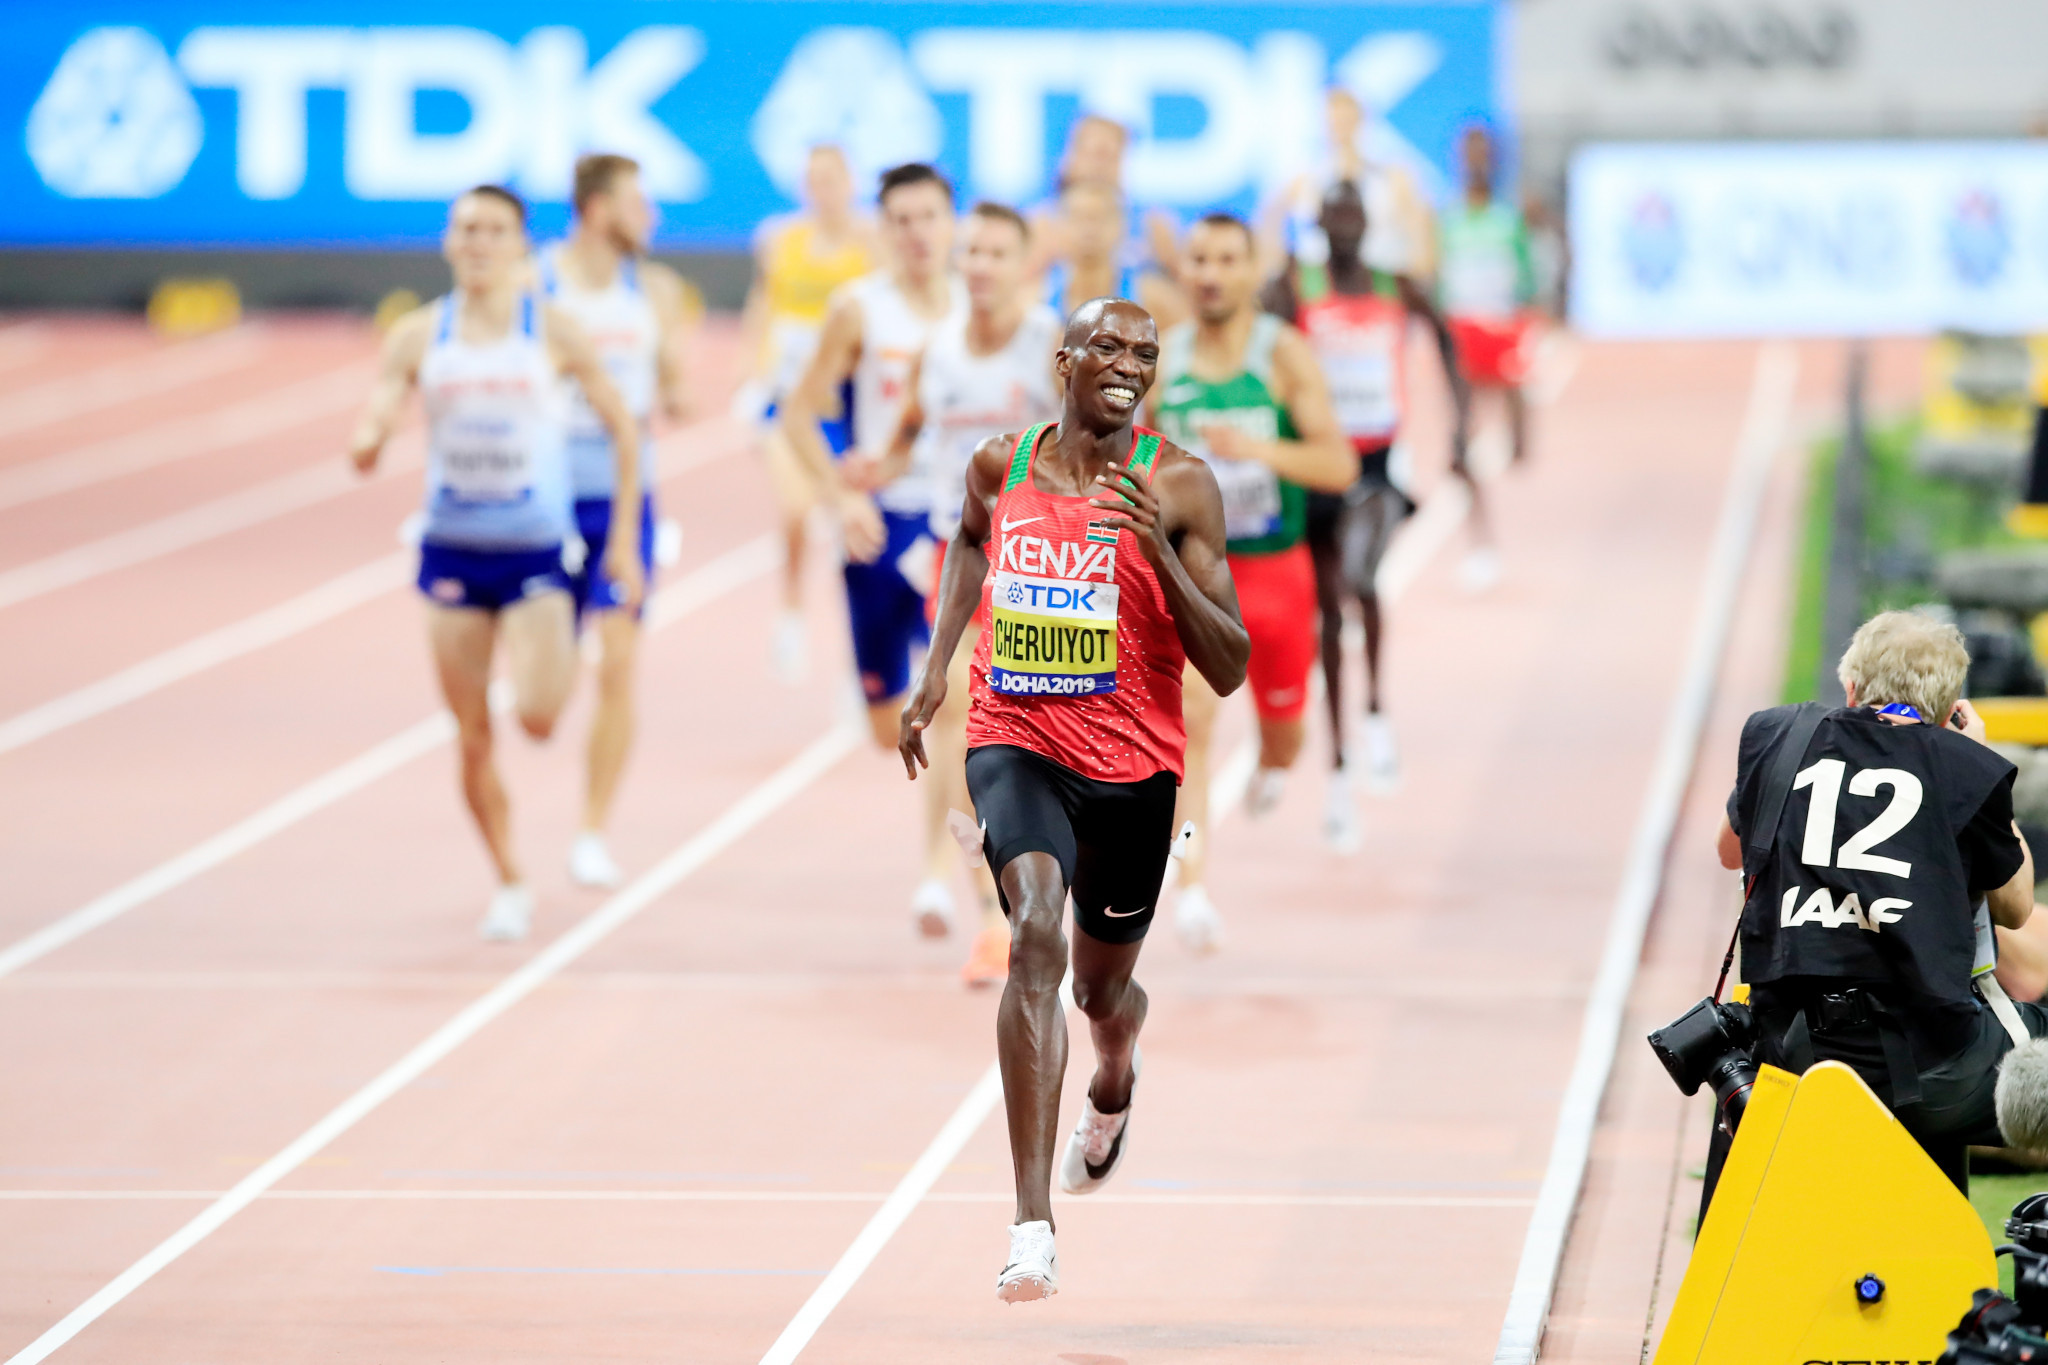 Timothy Cheruiyot of Kenya destroyed the rest of the field to win the men's 1,500m with an outstanding display of front-running ©Getty Images